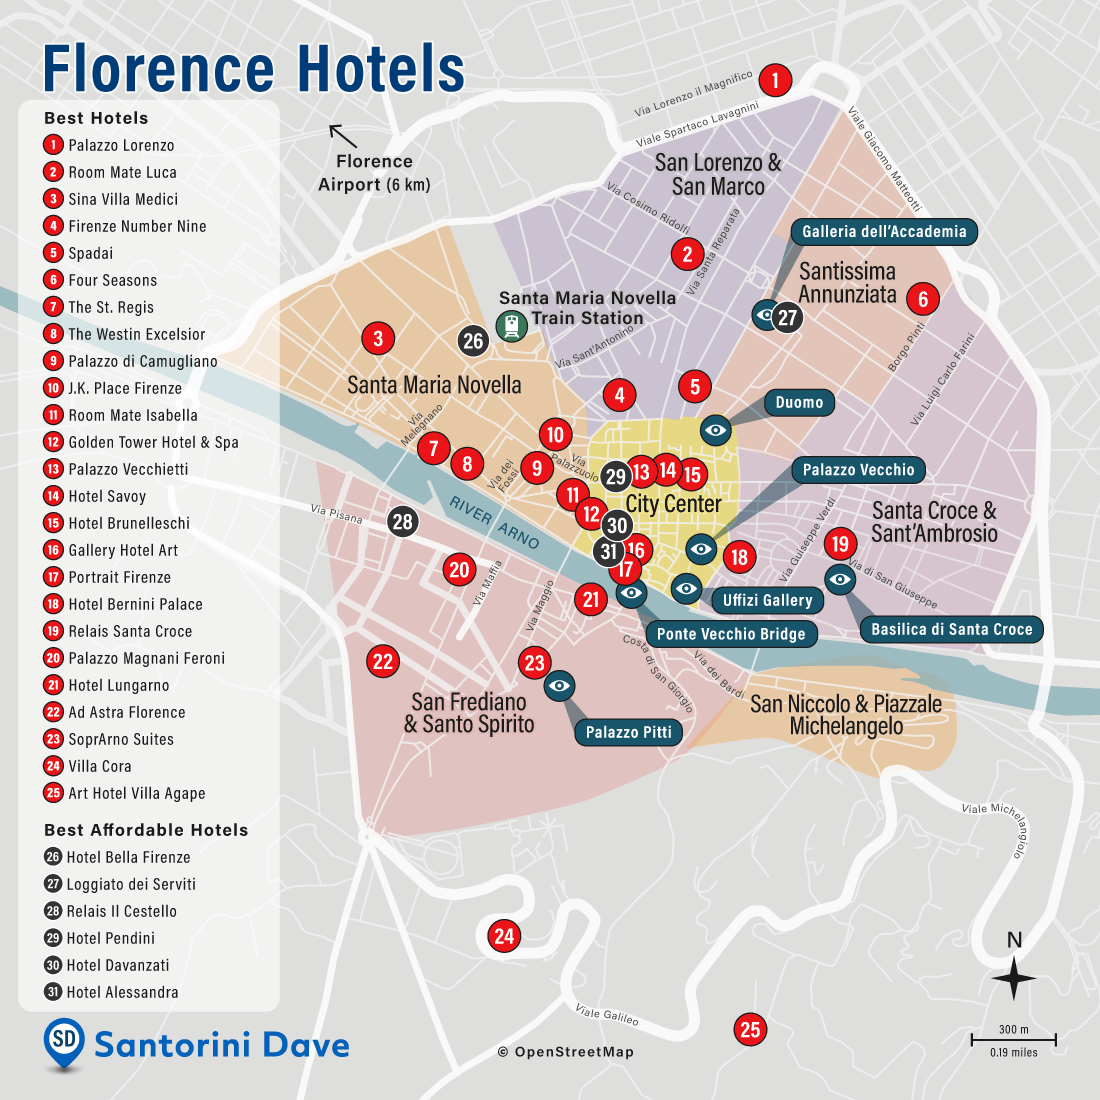 Map of Flrorence best hotels and neighborhoods.